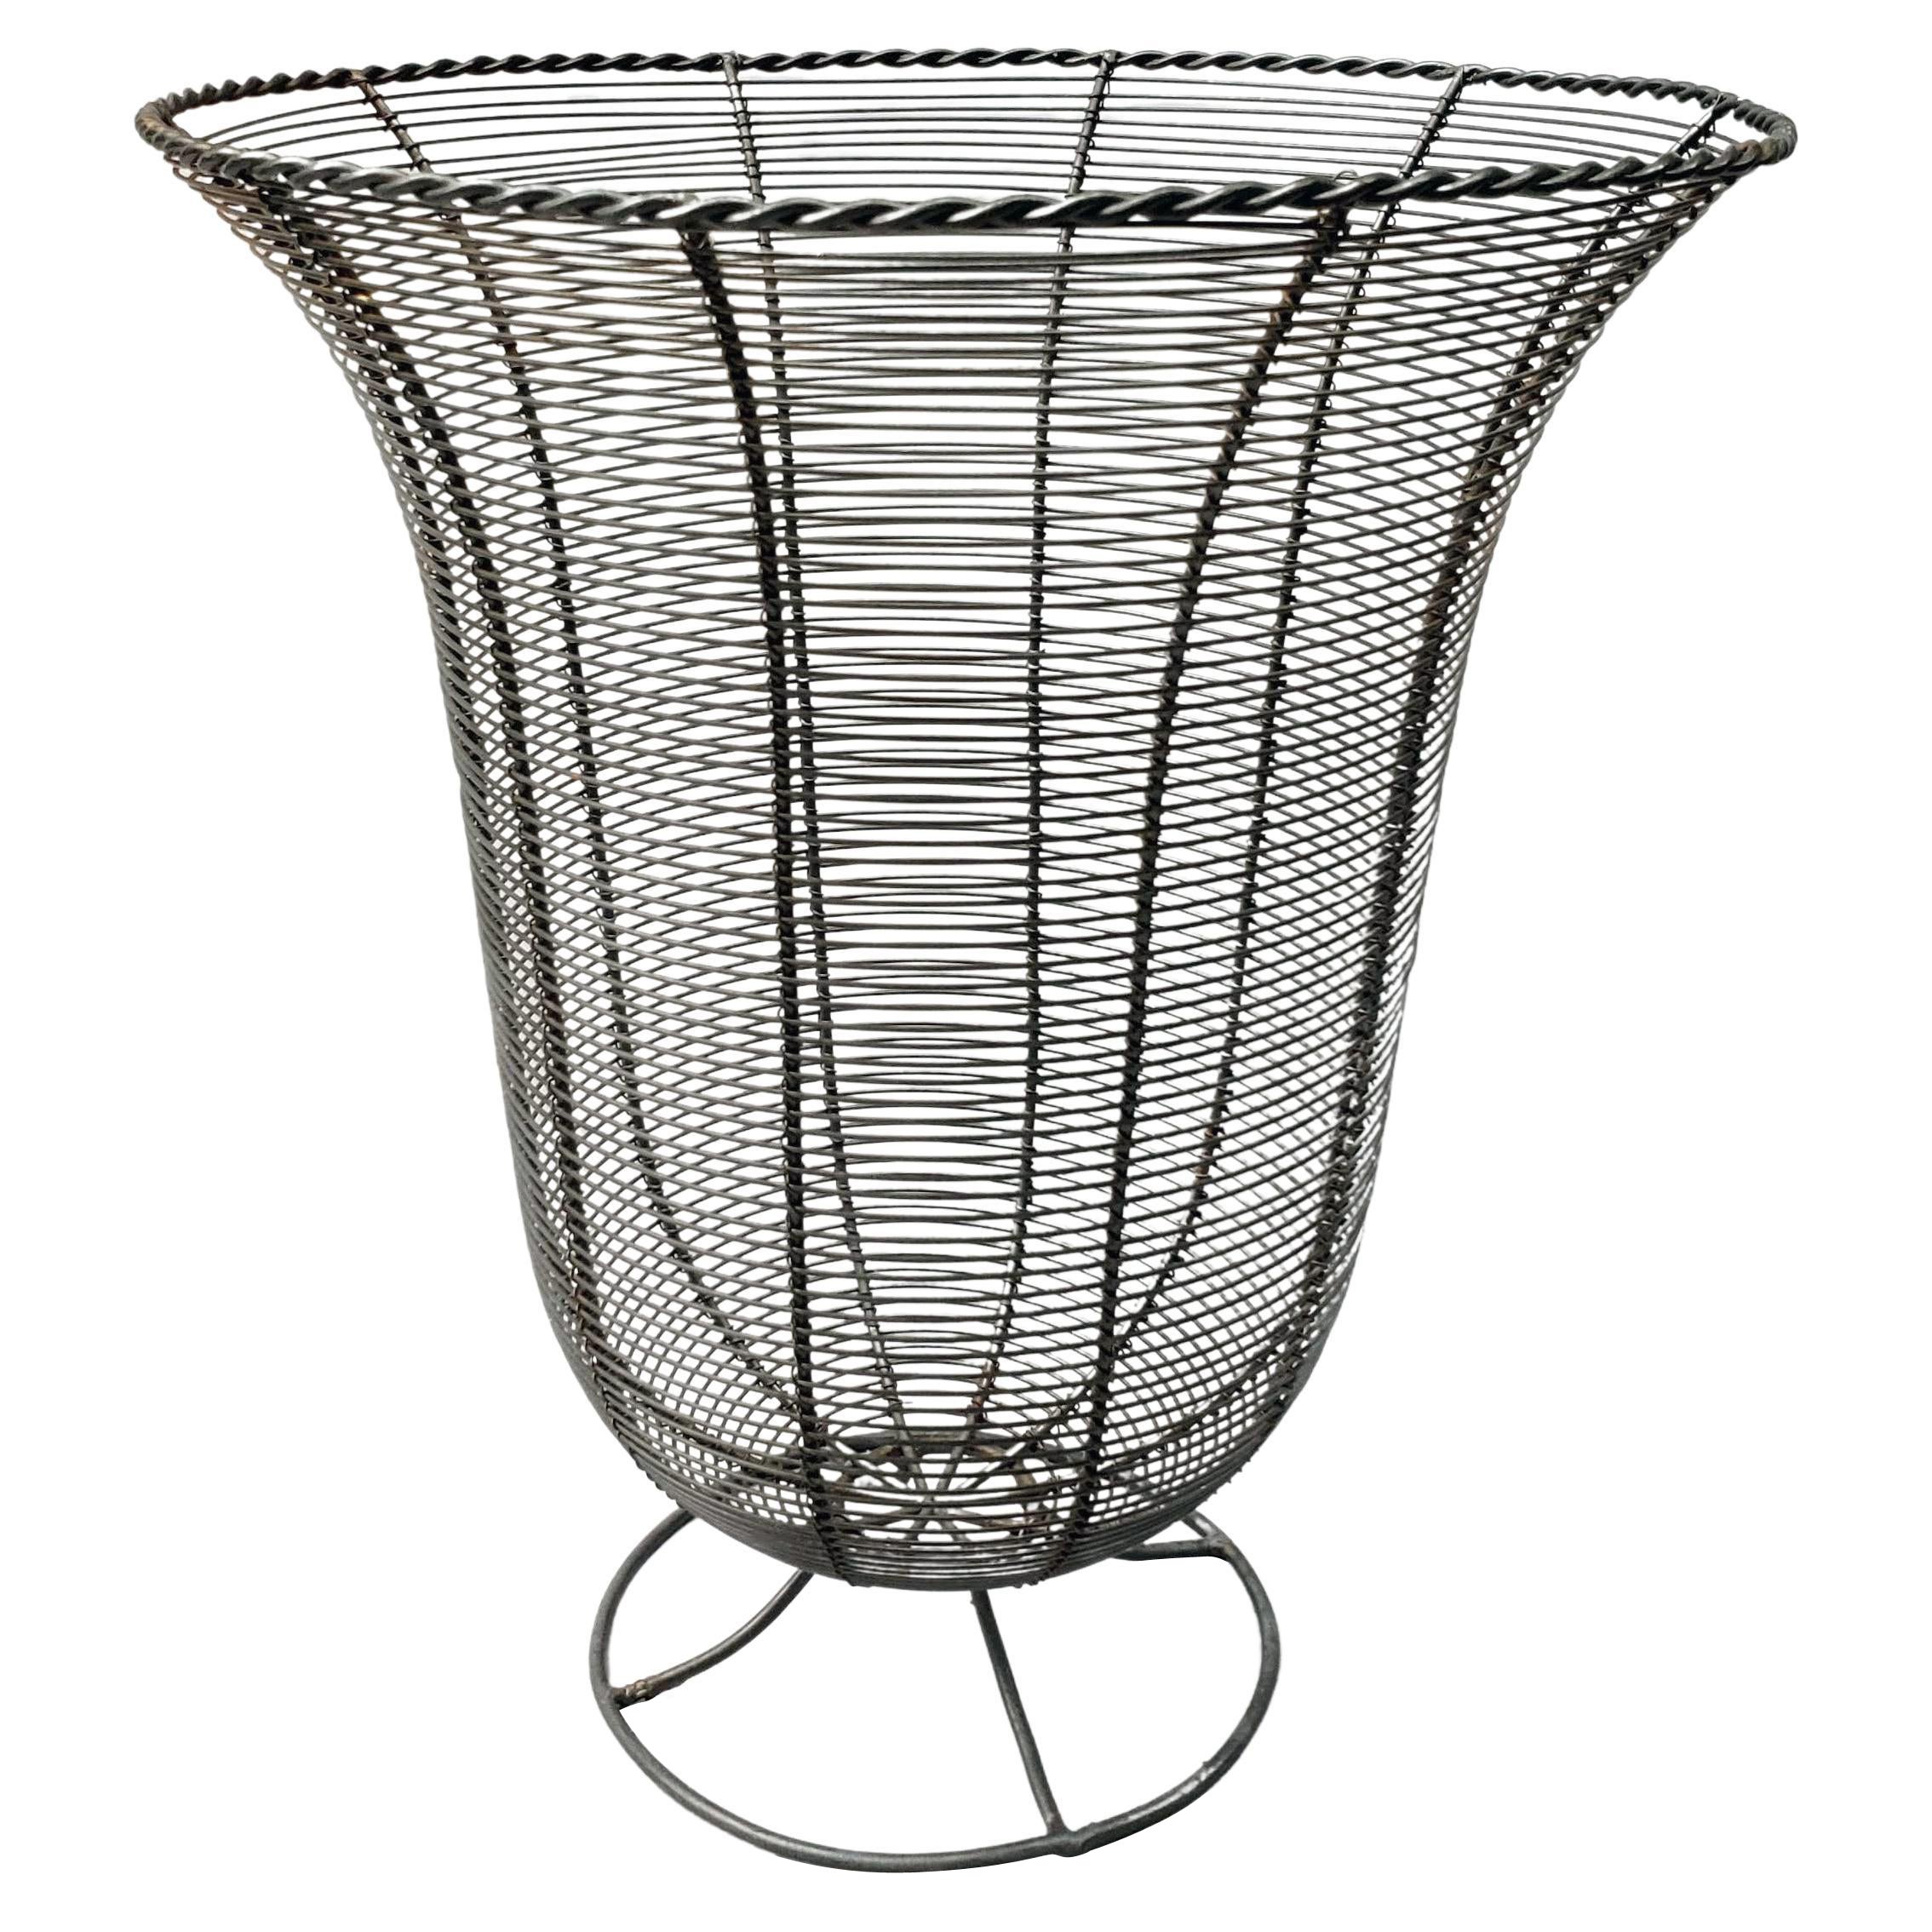 Midcentury 1940s American Wire Waste Basket For Sale